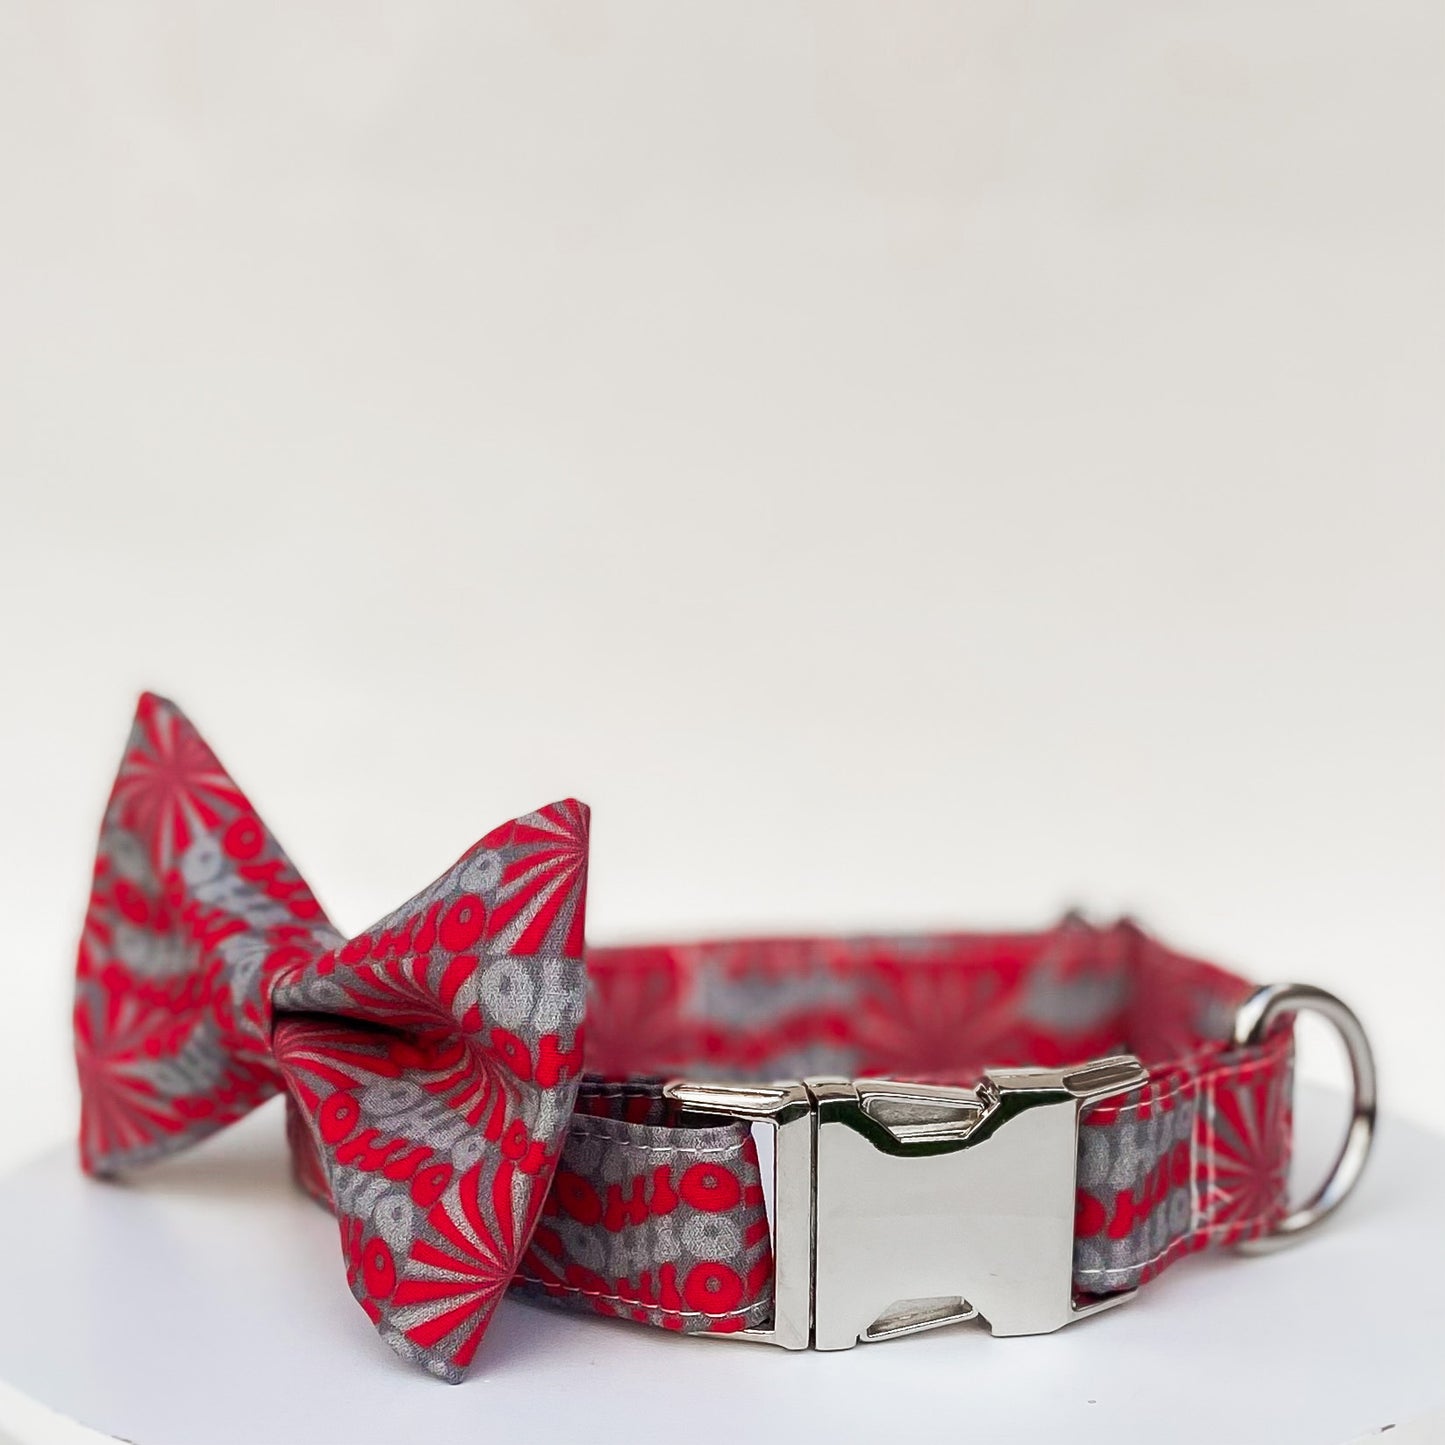 Groovy OHIO scarlet and gray dog bow tie